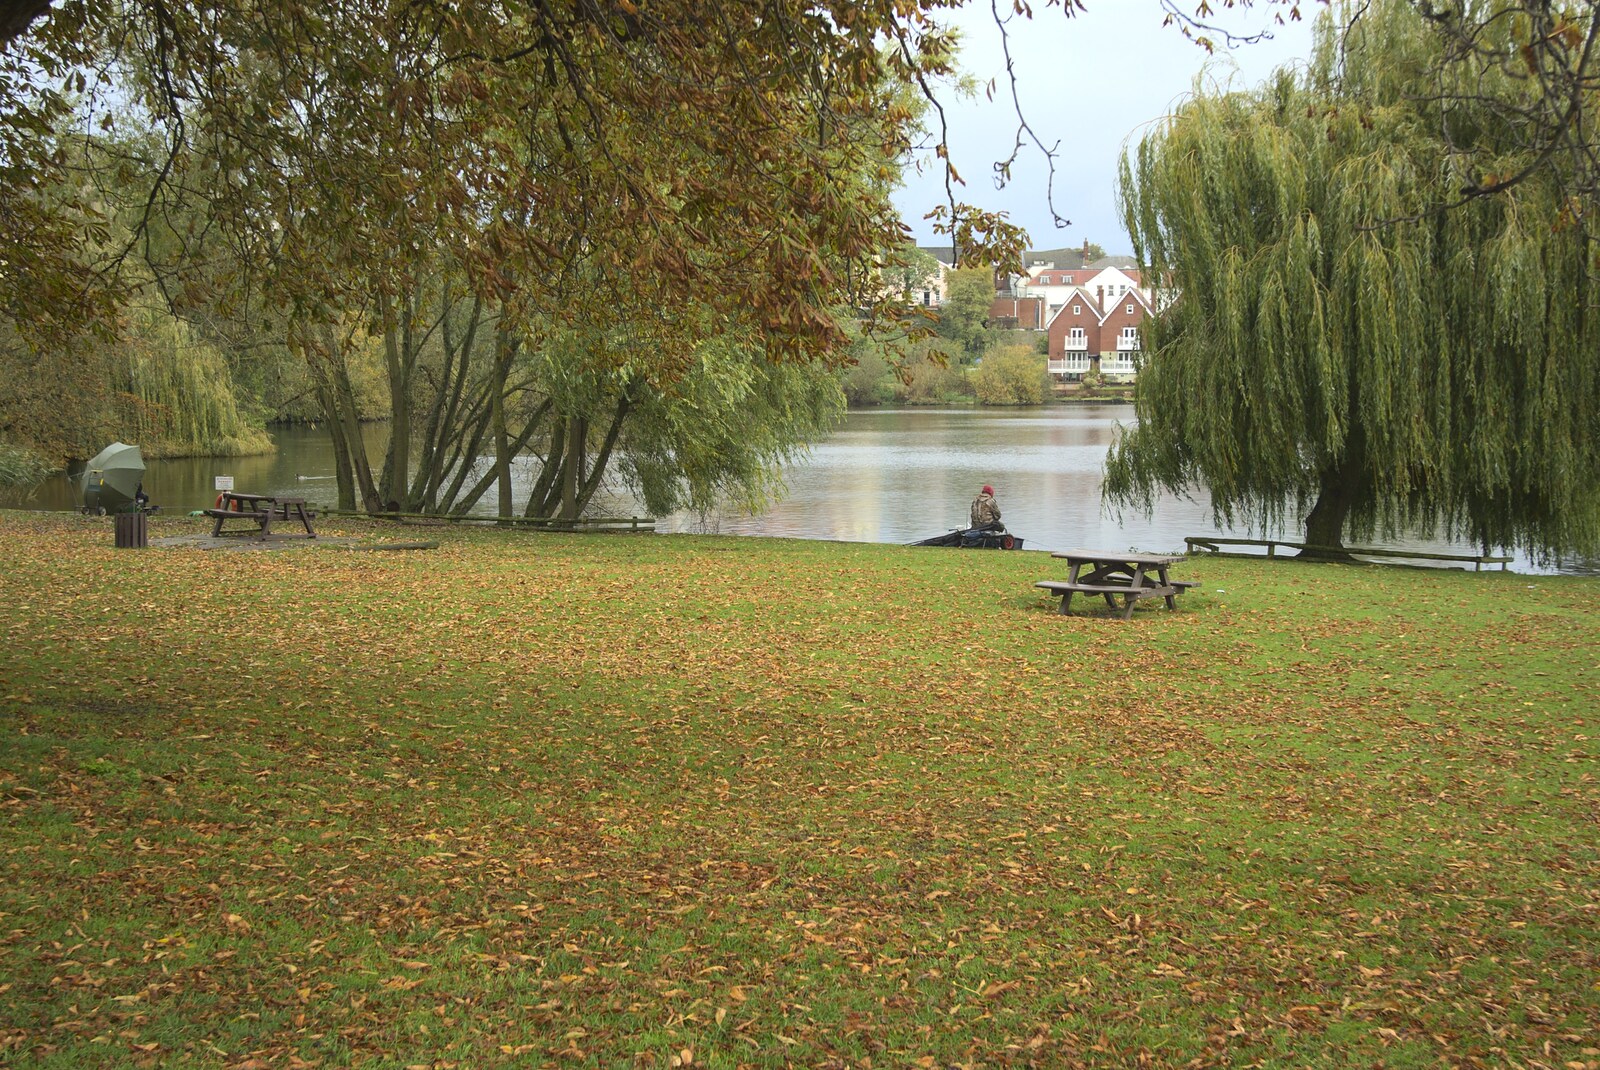 Autumn leaves in Diss Park from Gemma Leaves, The Mellis Railway and Taptu Moves Desks, Cambridge - 24th October 2010